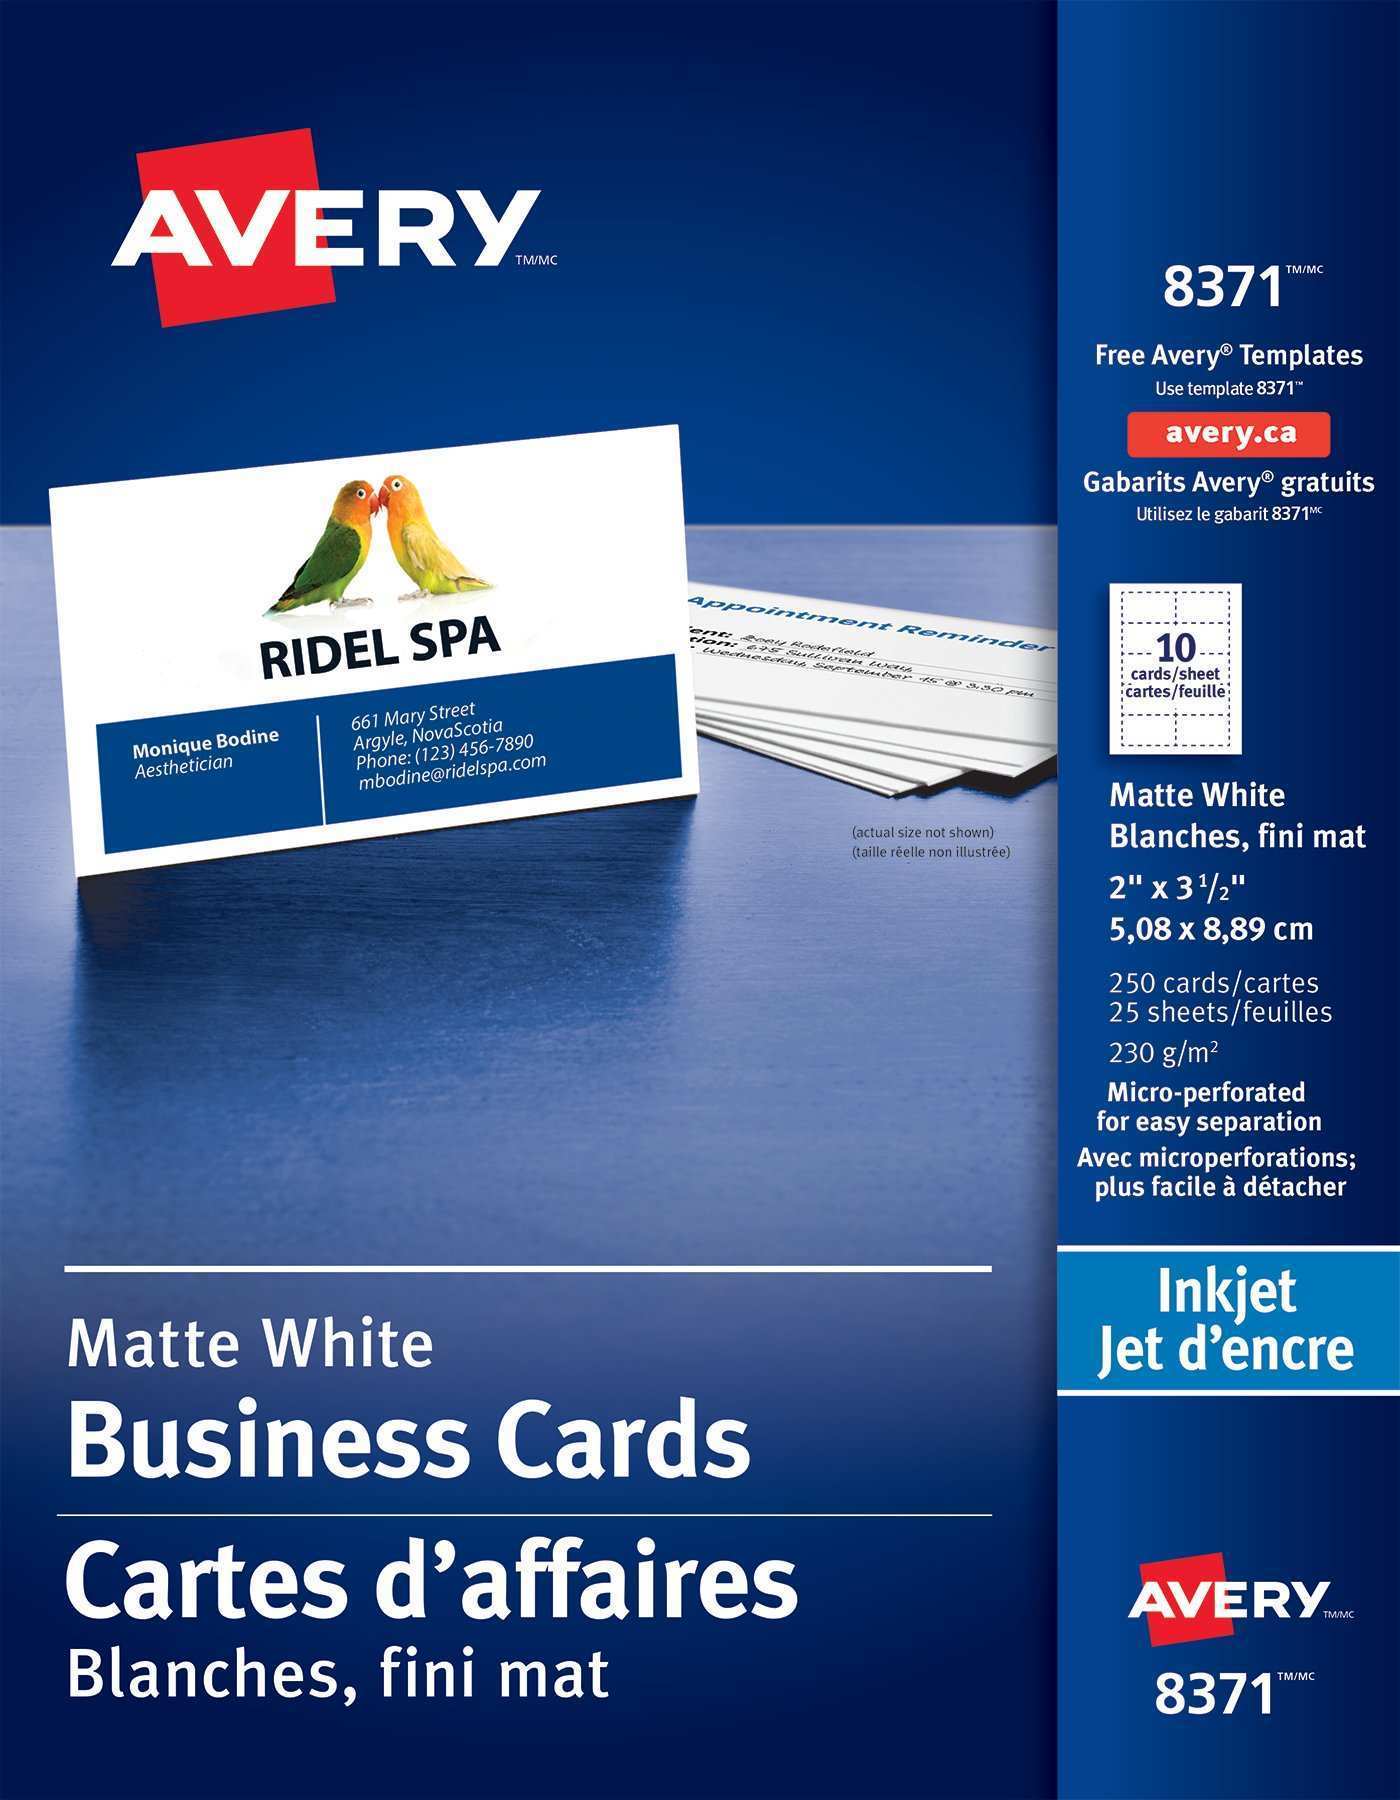 77 Free Printable Avery Business Card Template 08371 Maker with Avery Business Card Template 08371